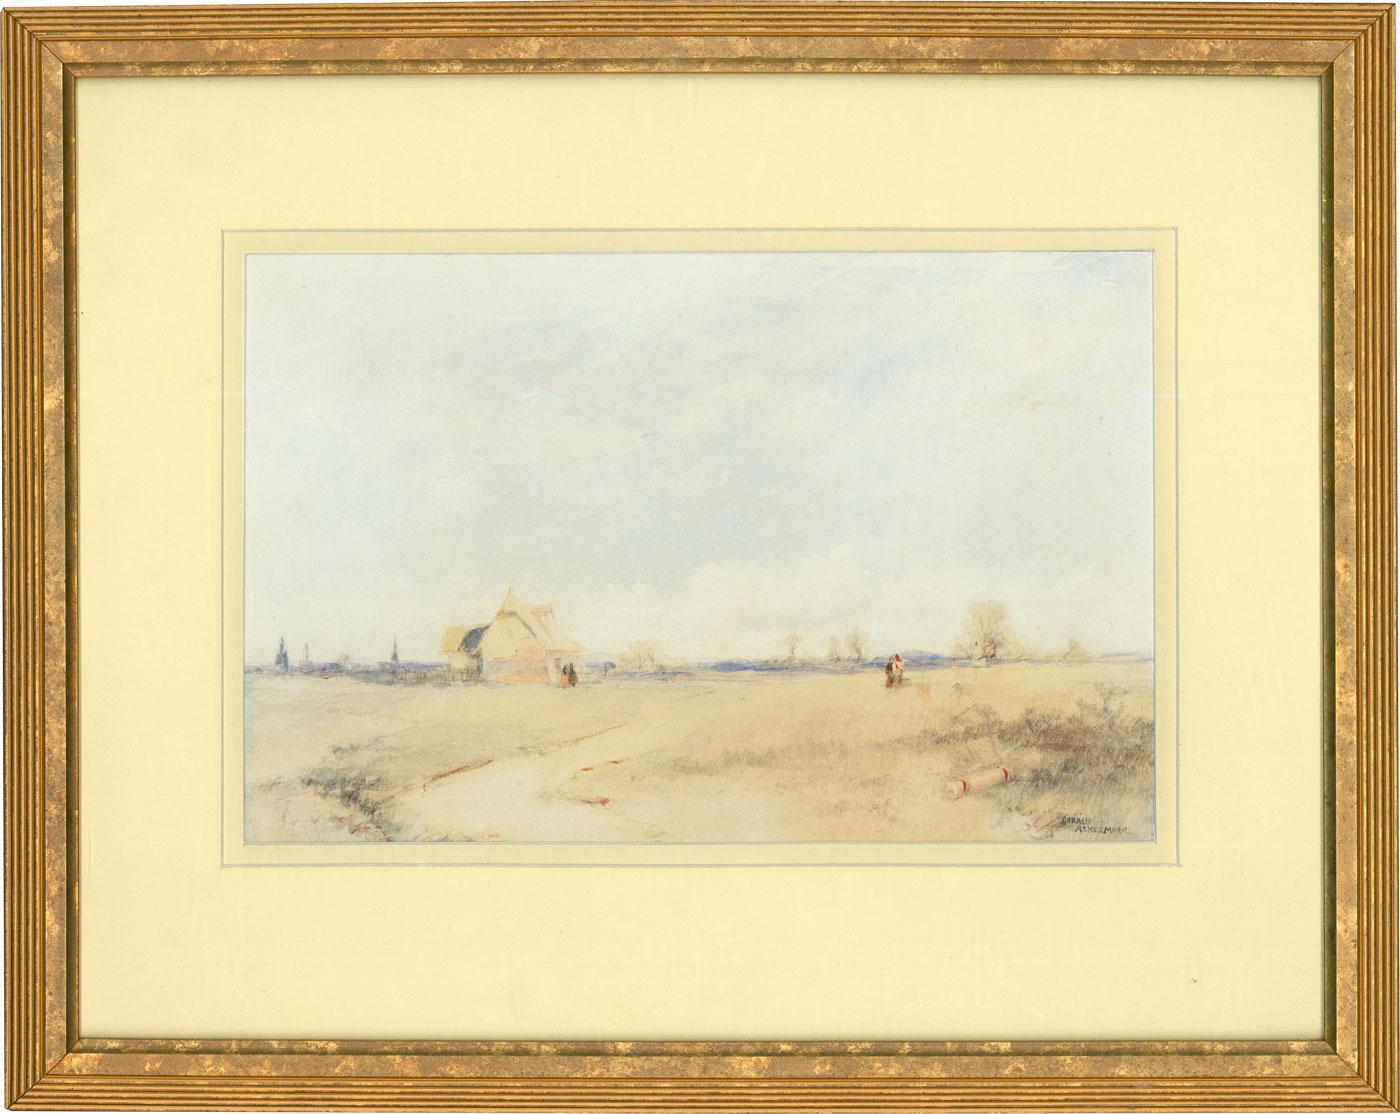 Arthur Gerald Ackerman - rural landscape in watercolours. Signed lower right. Well-presented in a modern gilt-effect frame with a later inscription verso. On paper.
